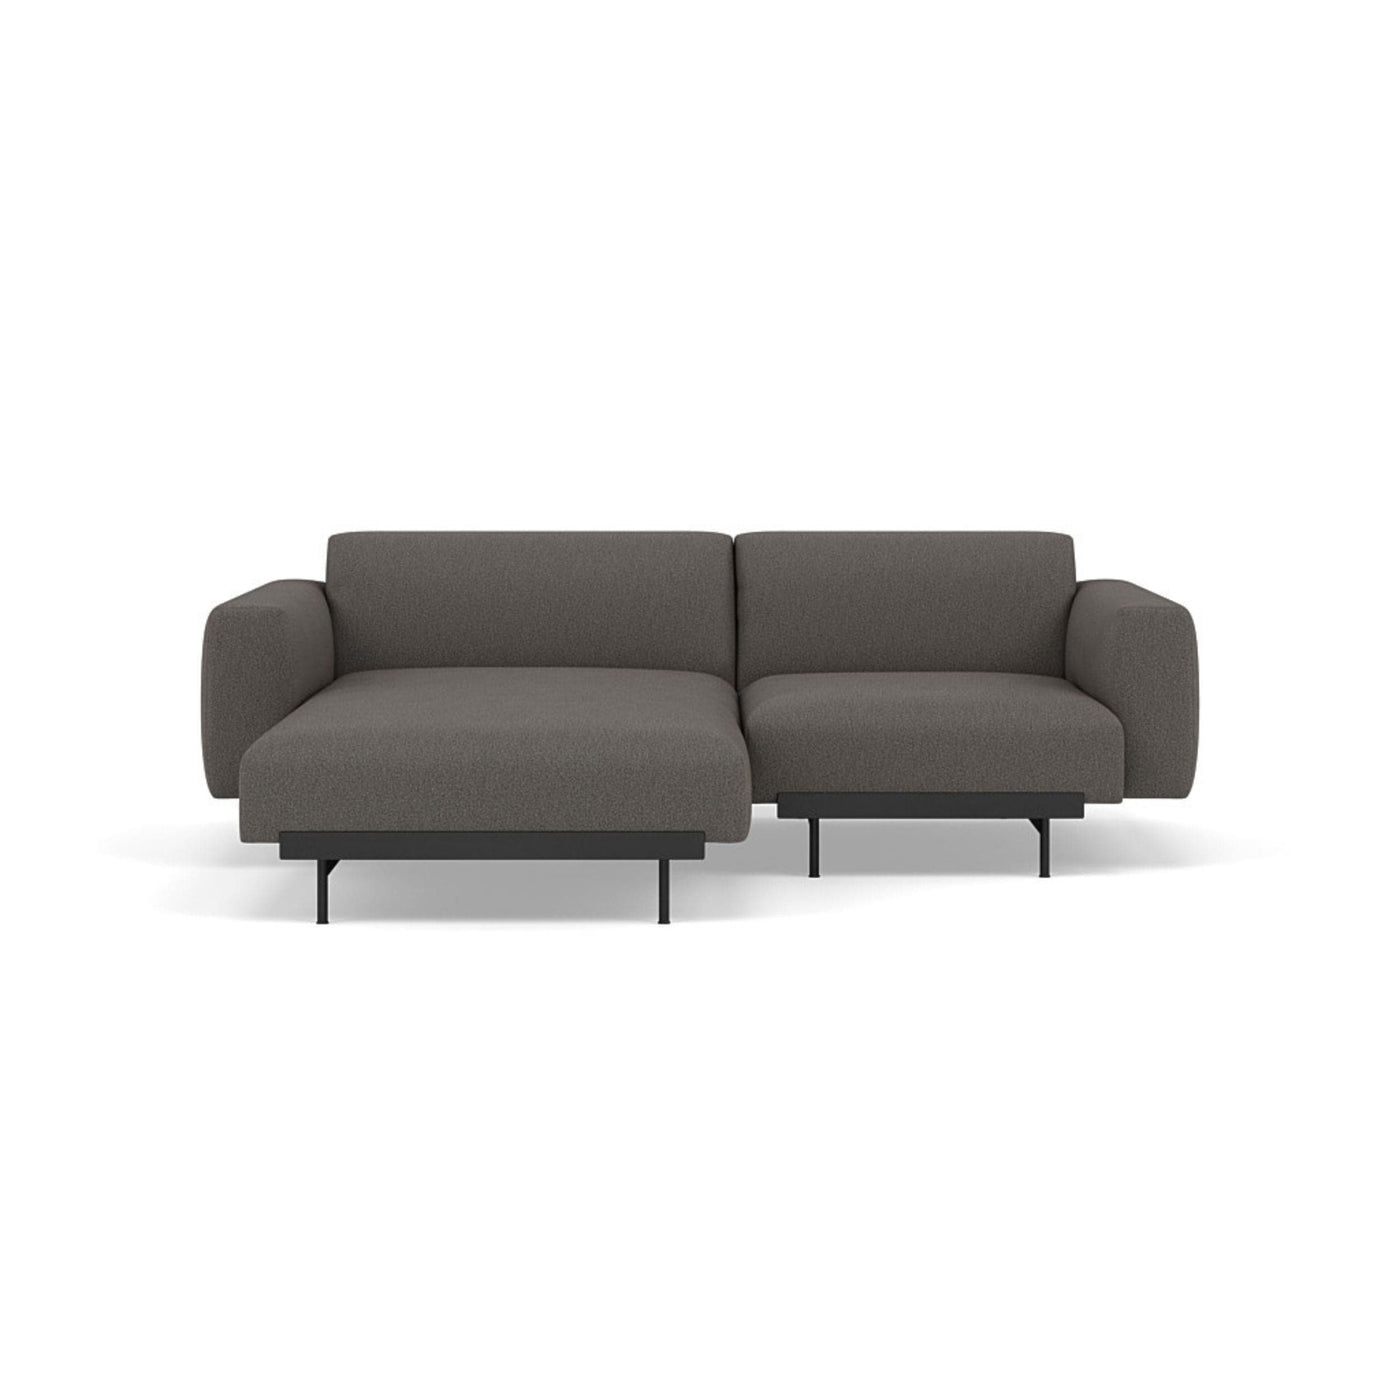 Muuto In Situ Modular 2 Seater Sofa, configuration 5. Made to order from someday designs #colour_clay-9